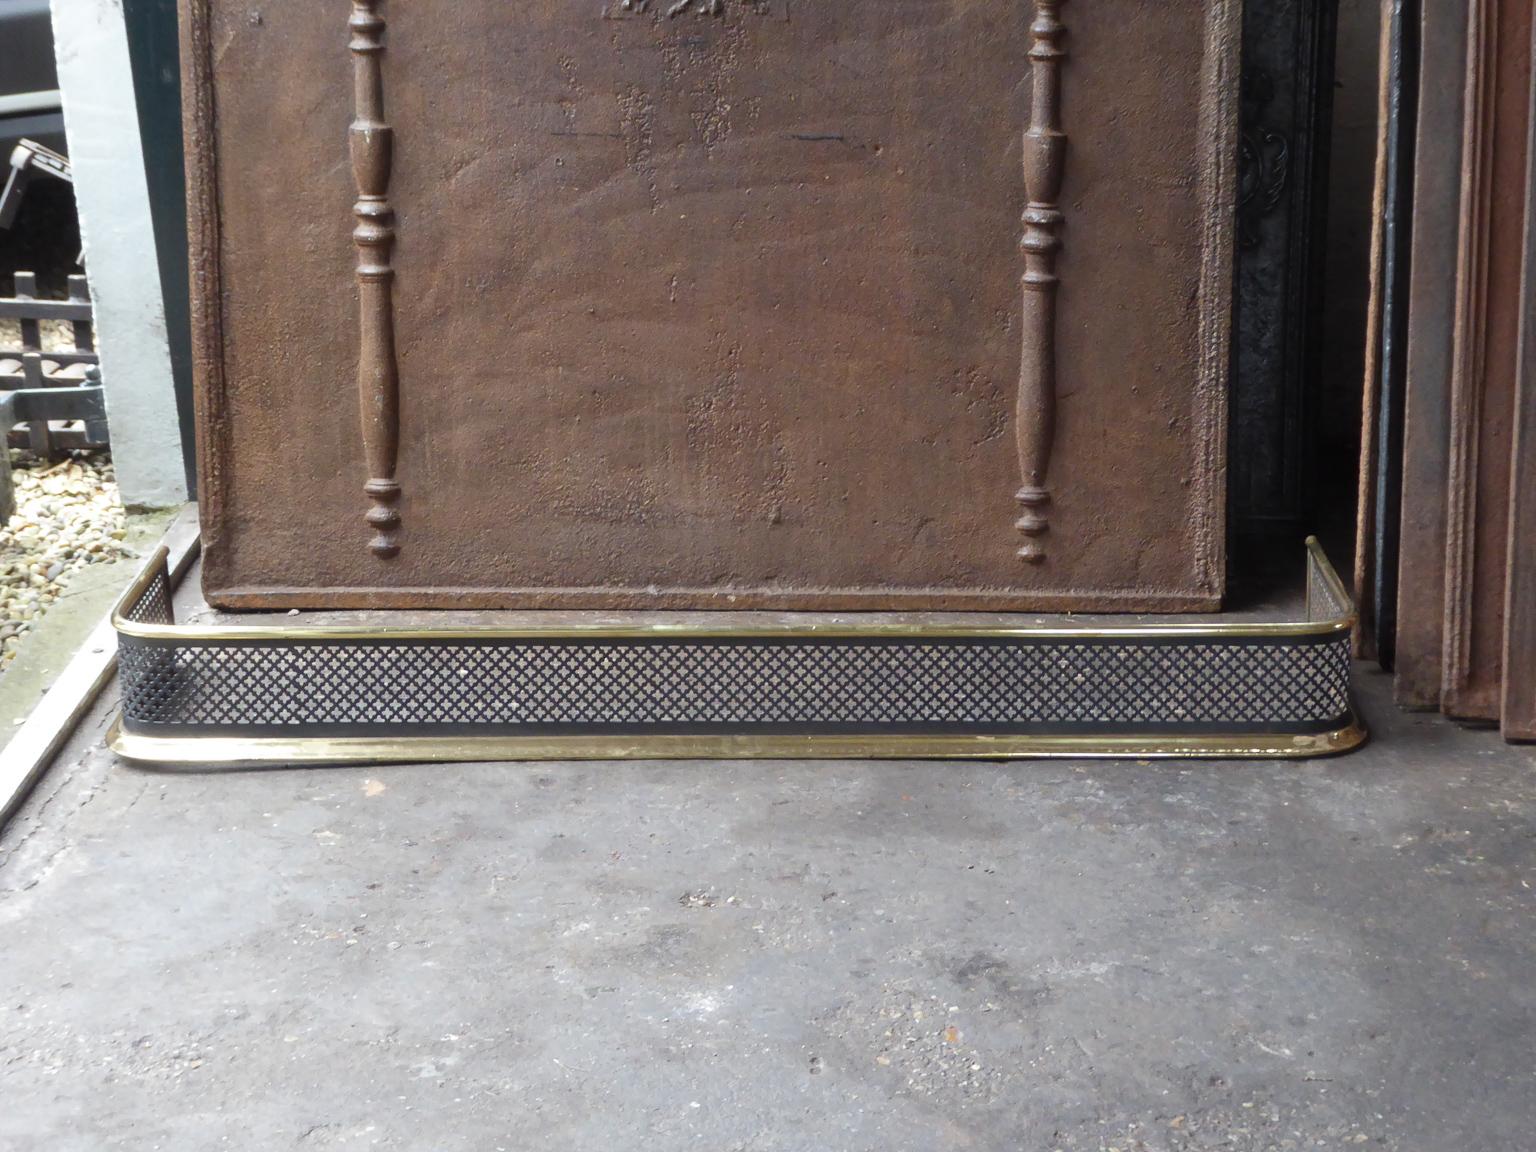 19th century English Victorian fireplace fender. The fender is made of polished brass and iron. The fender is in a good condition and is fully functional.